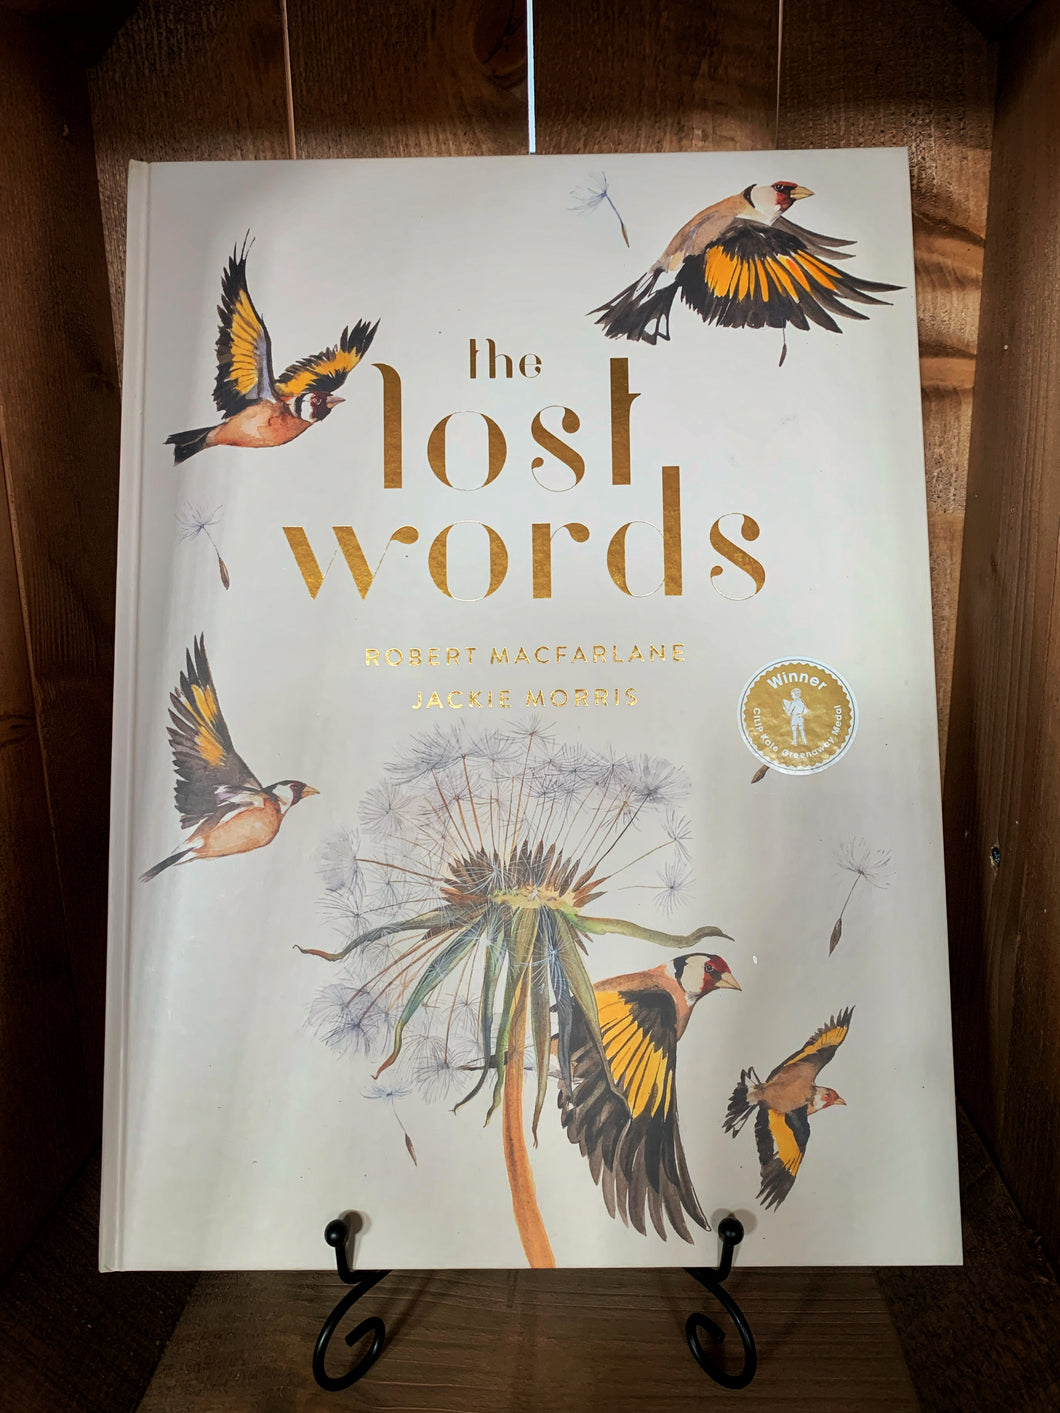 Image of the front of the book The Lost Words. The cover has a plain white/cream background, with illustrations of 5 goldfinches in flight, and a dandelion seed head. The title of the book is written in the center in foiled gold text.